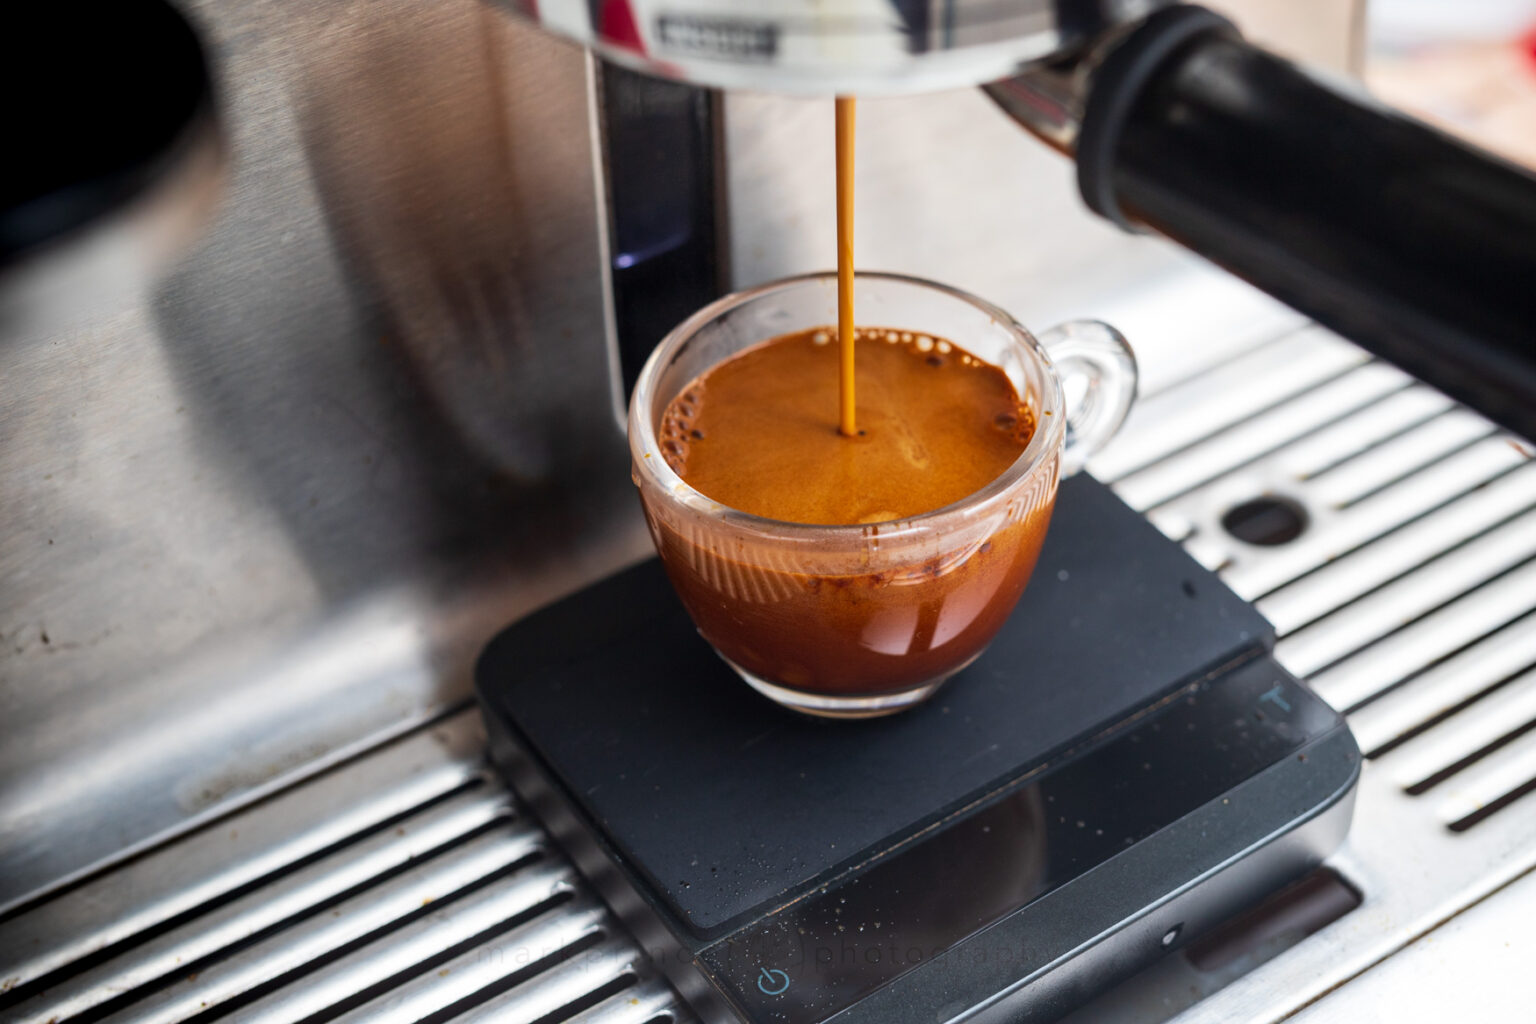 If you'll note, there's almost no "splatter" or evidence of pinhole extraction issues - the grind's super even, and delivers a superior shot of espresso.